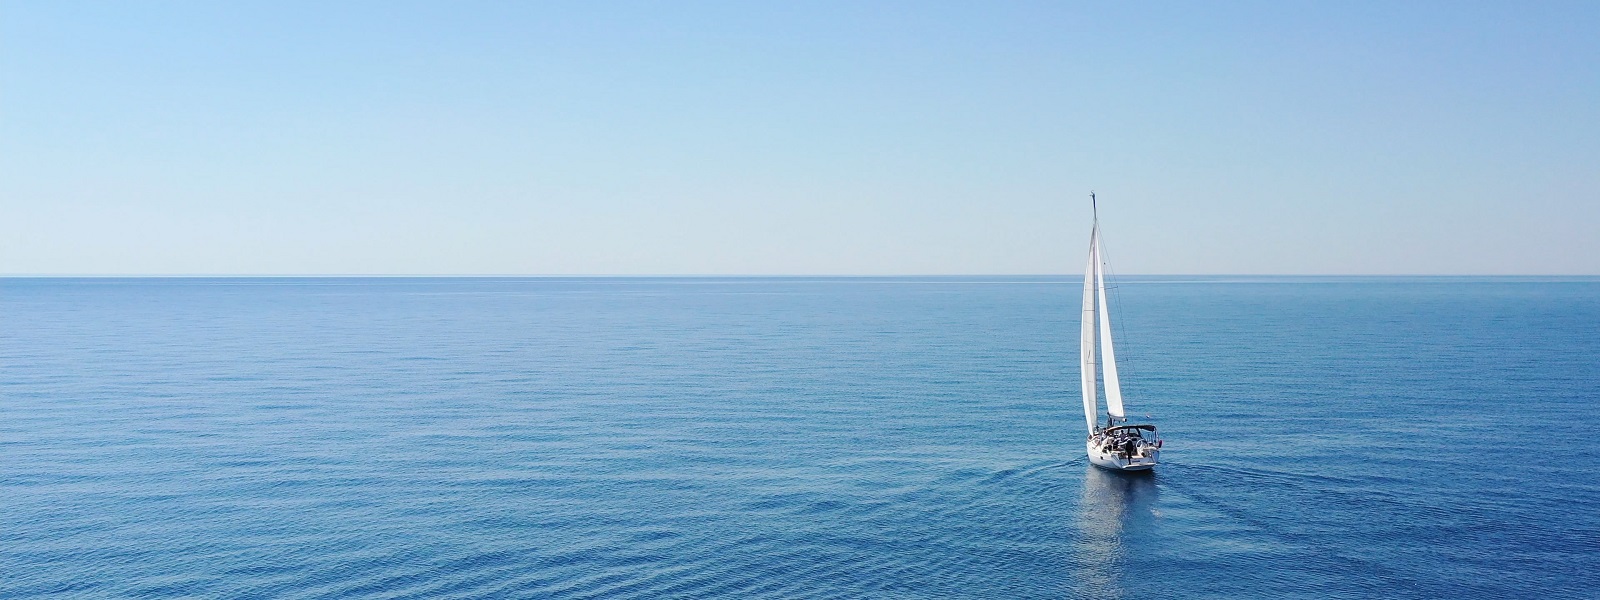 A yacht alone in a blue sea under a blue sky